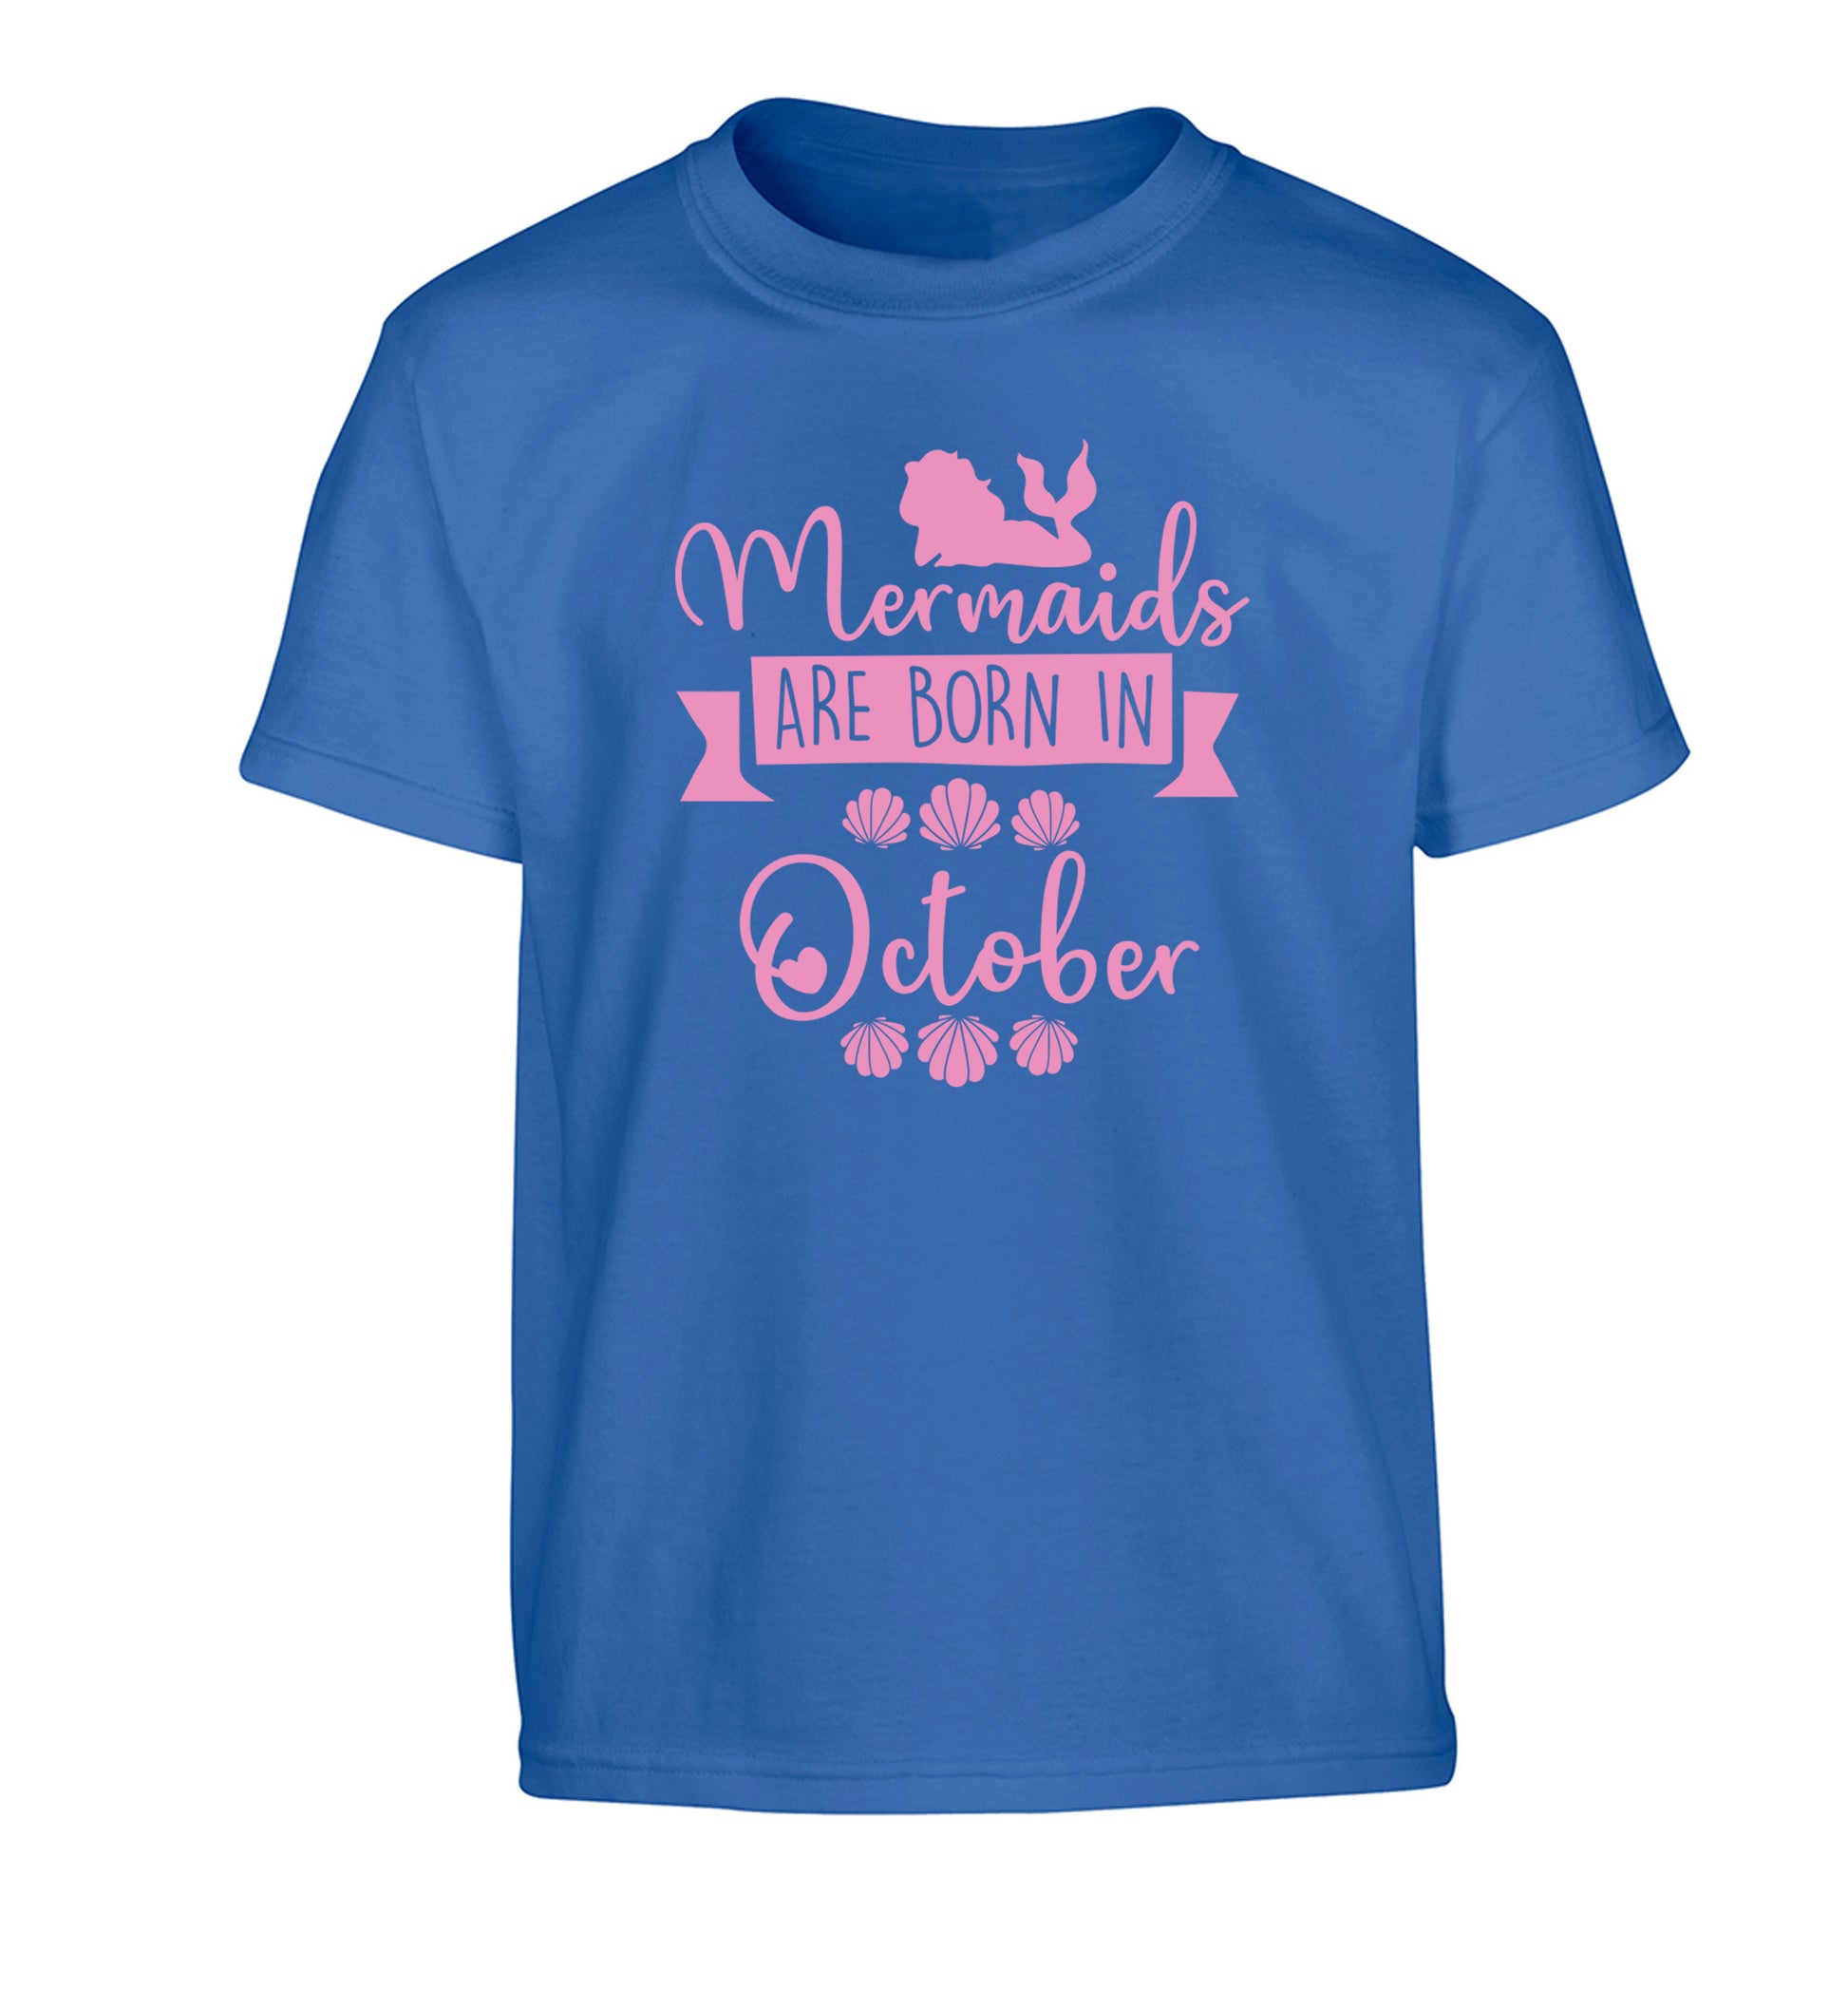 Mermaids are born in October Children's blue Tshirt 12-13 Years